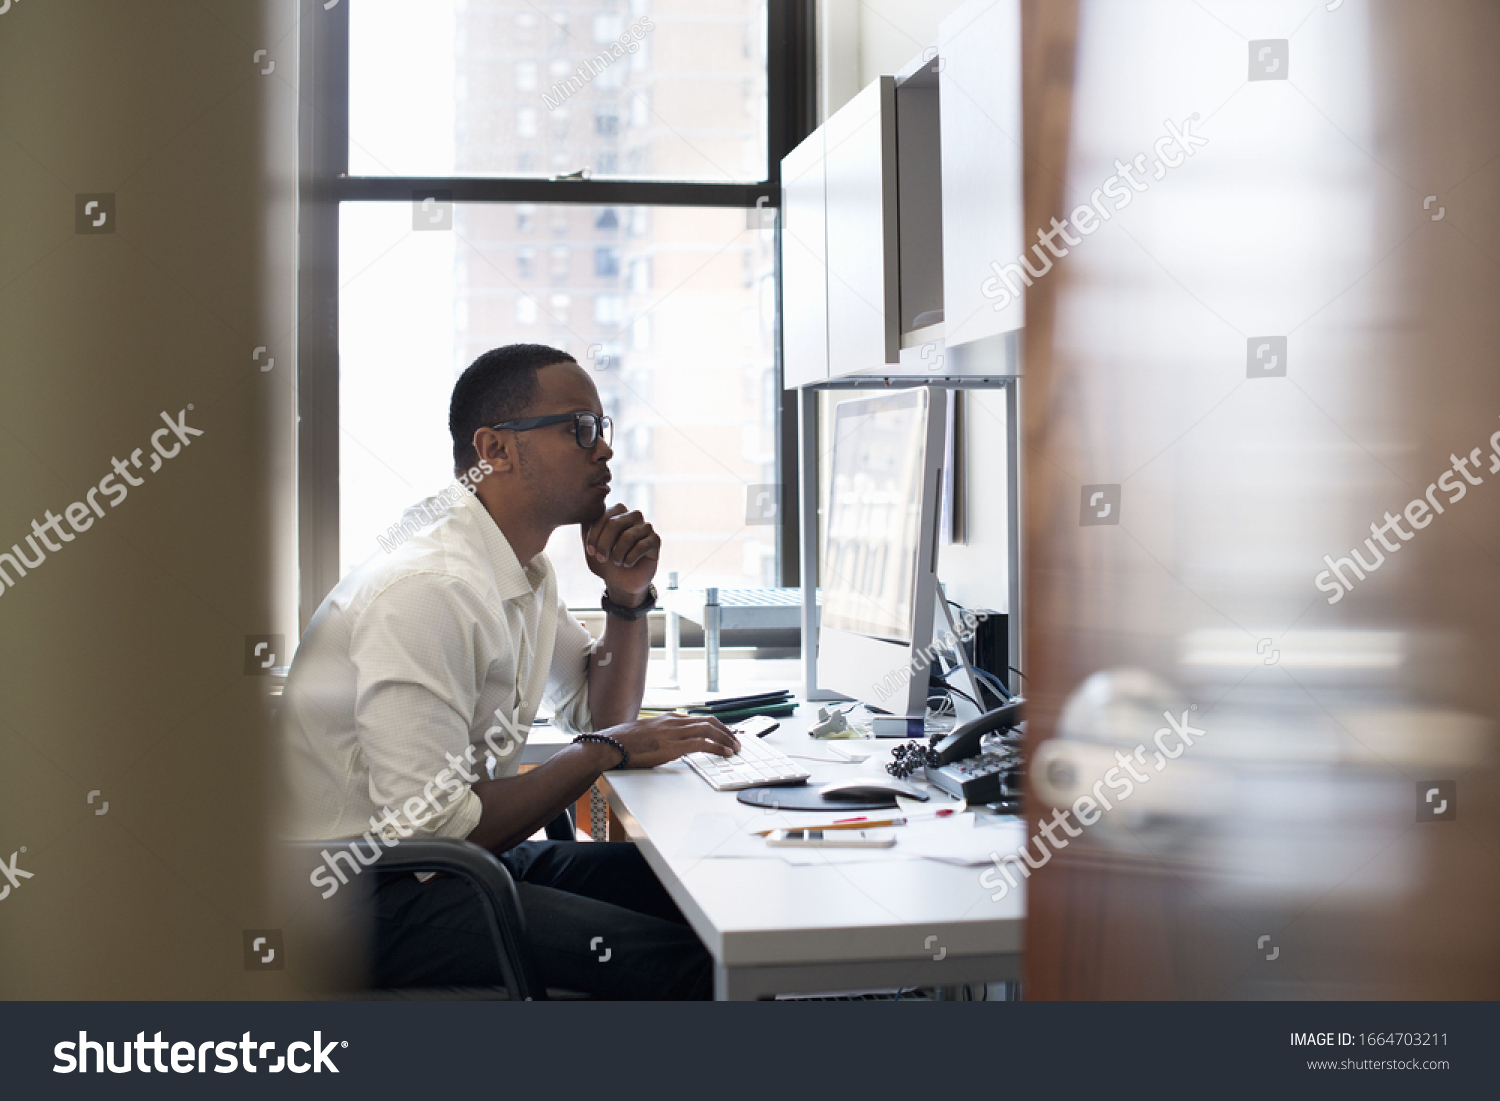 A man working in an office seated at a desk. Looking at a computer screen. #1664703211